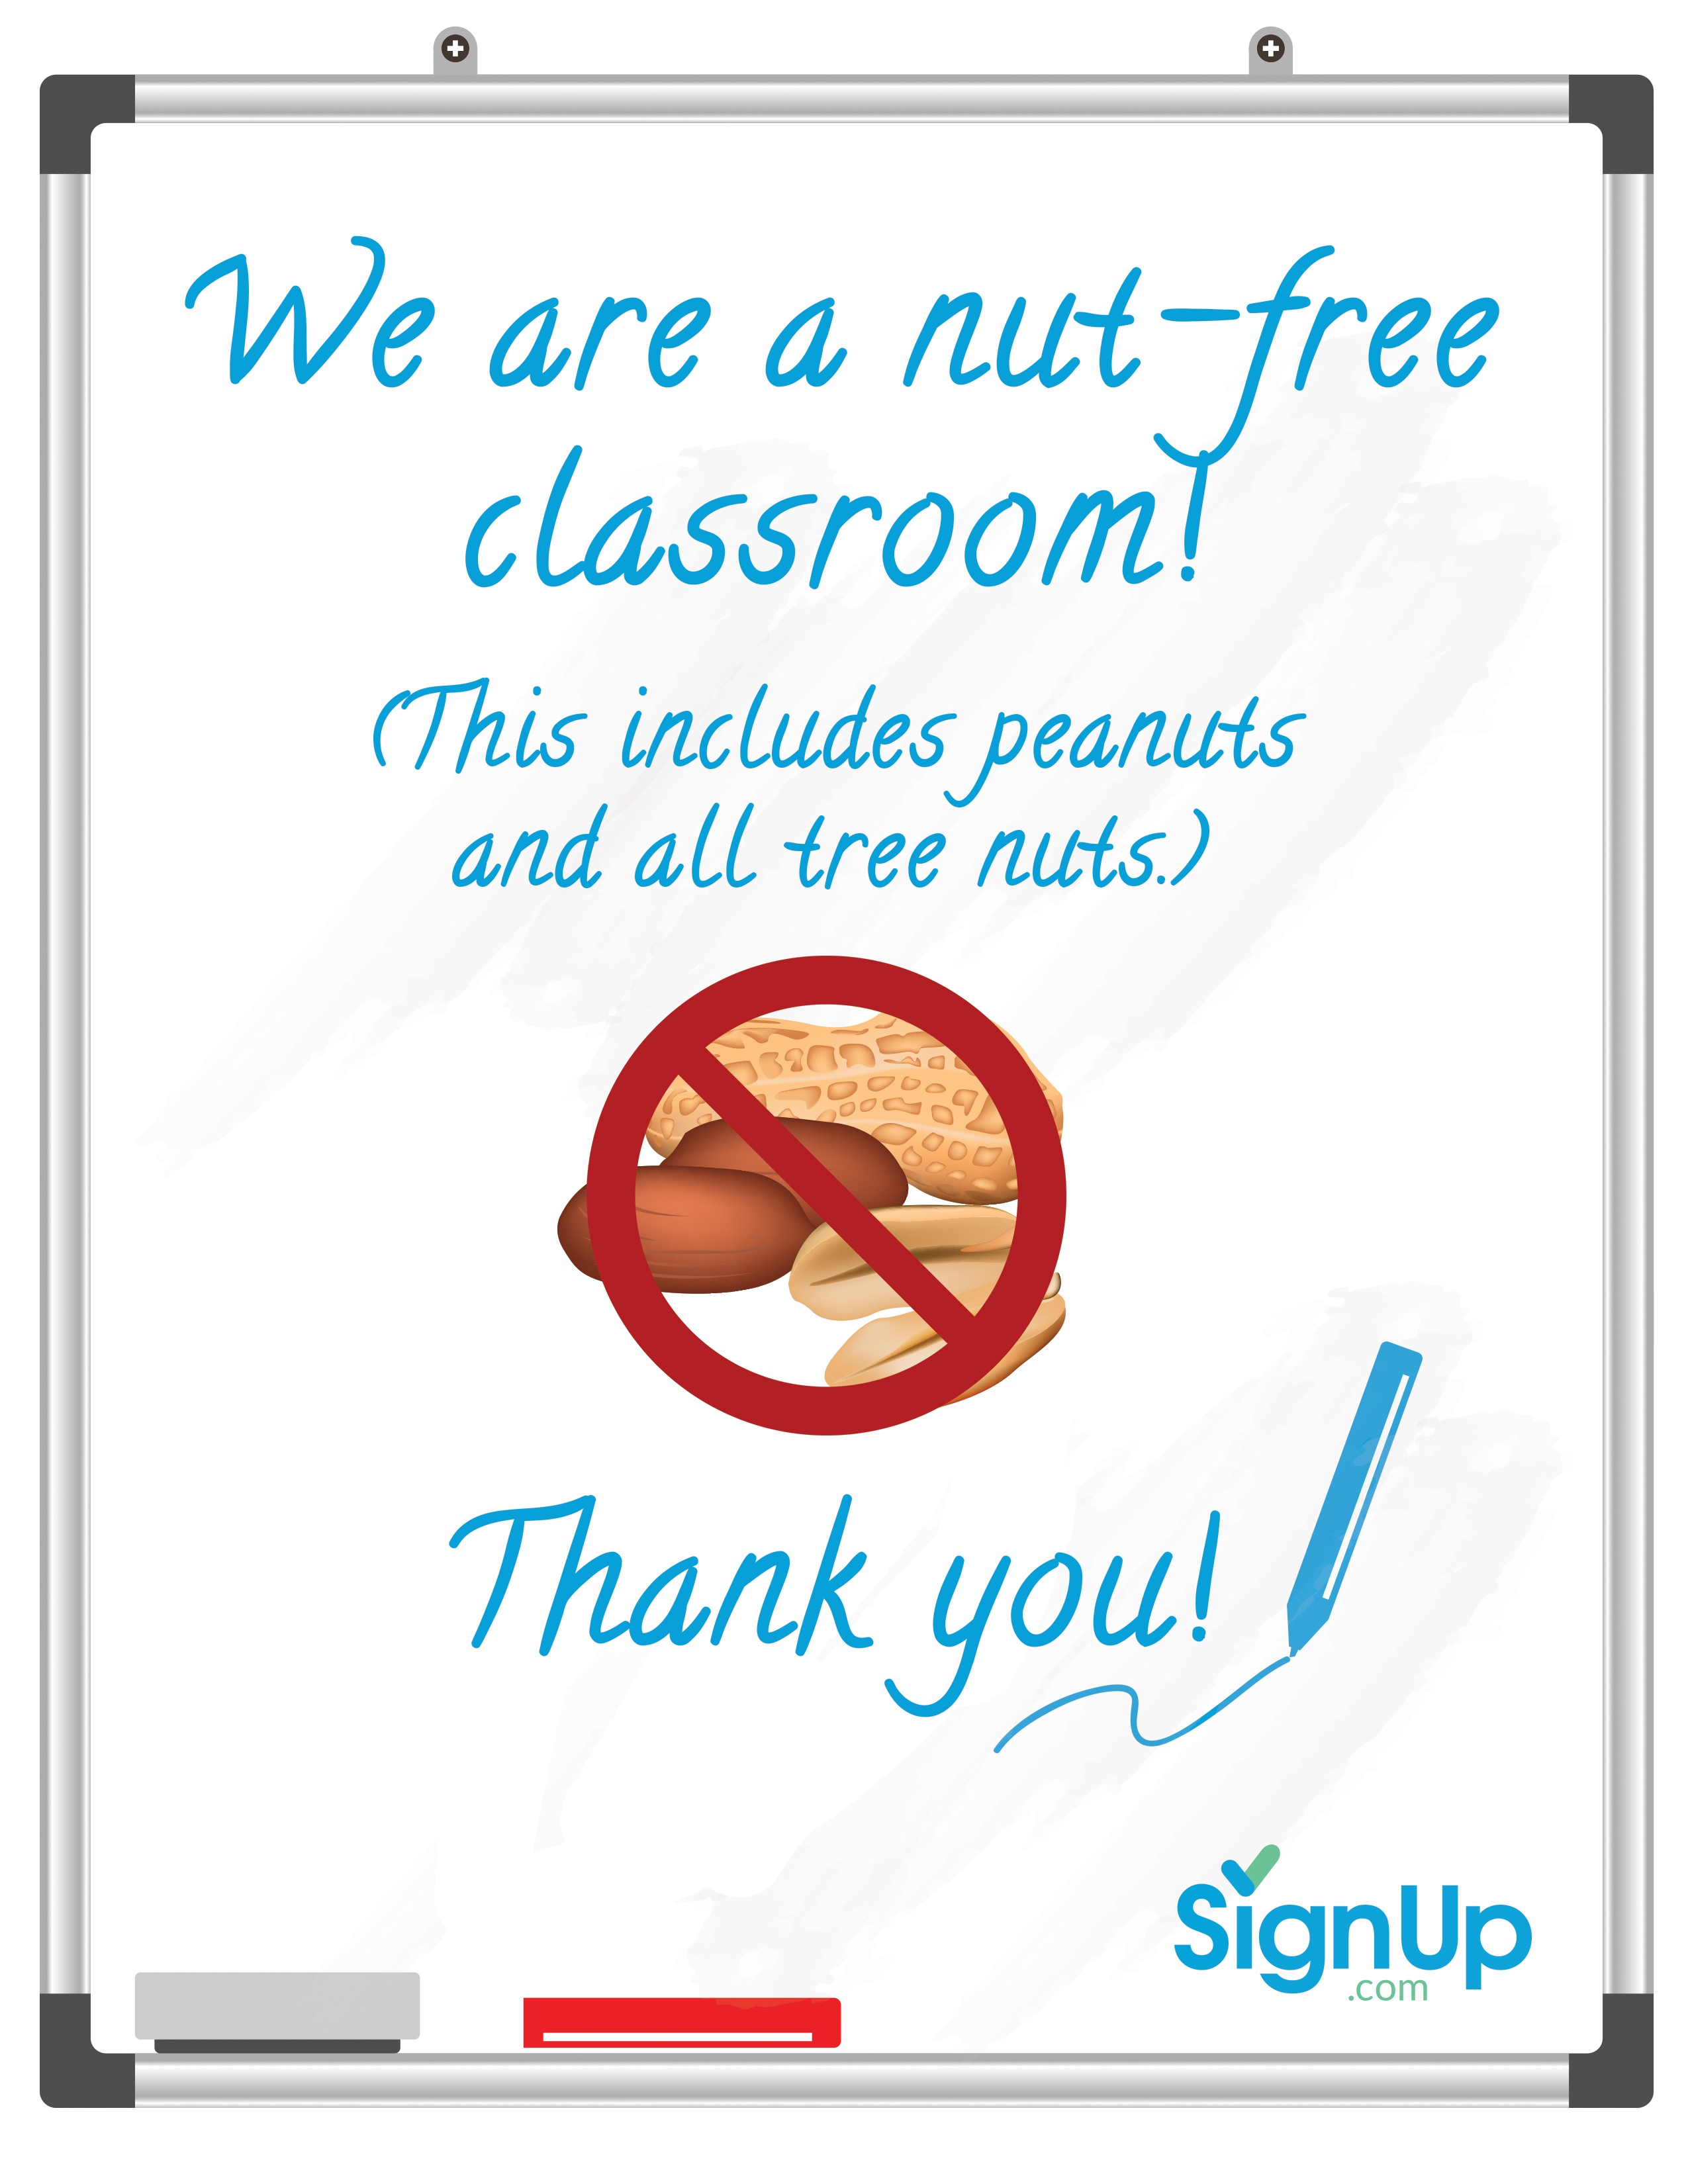 Free Printable Classroom Signs | Signup - Printable Peanut Free Classroom Signs